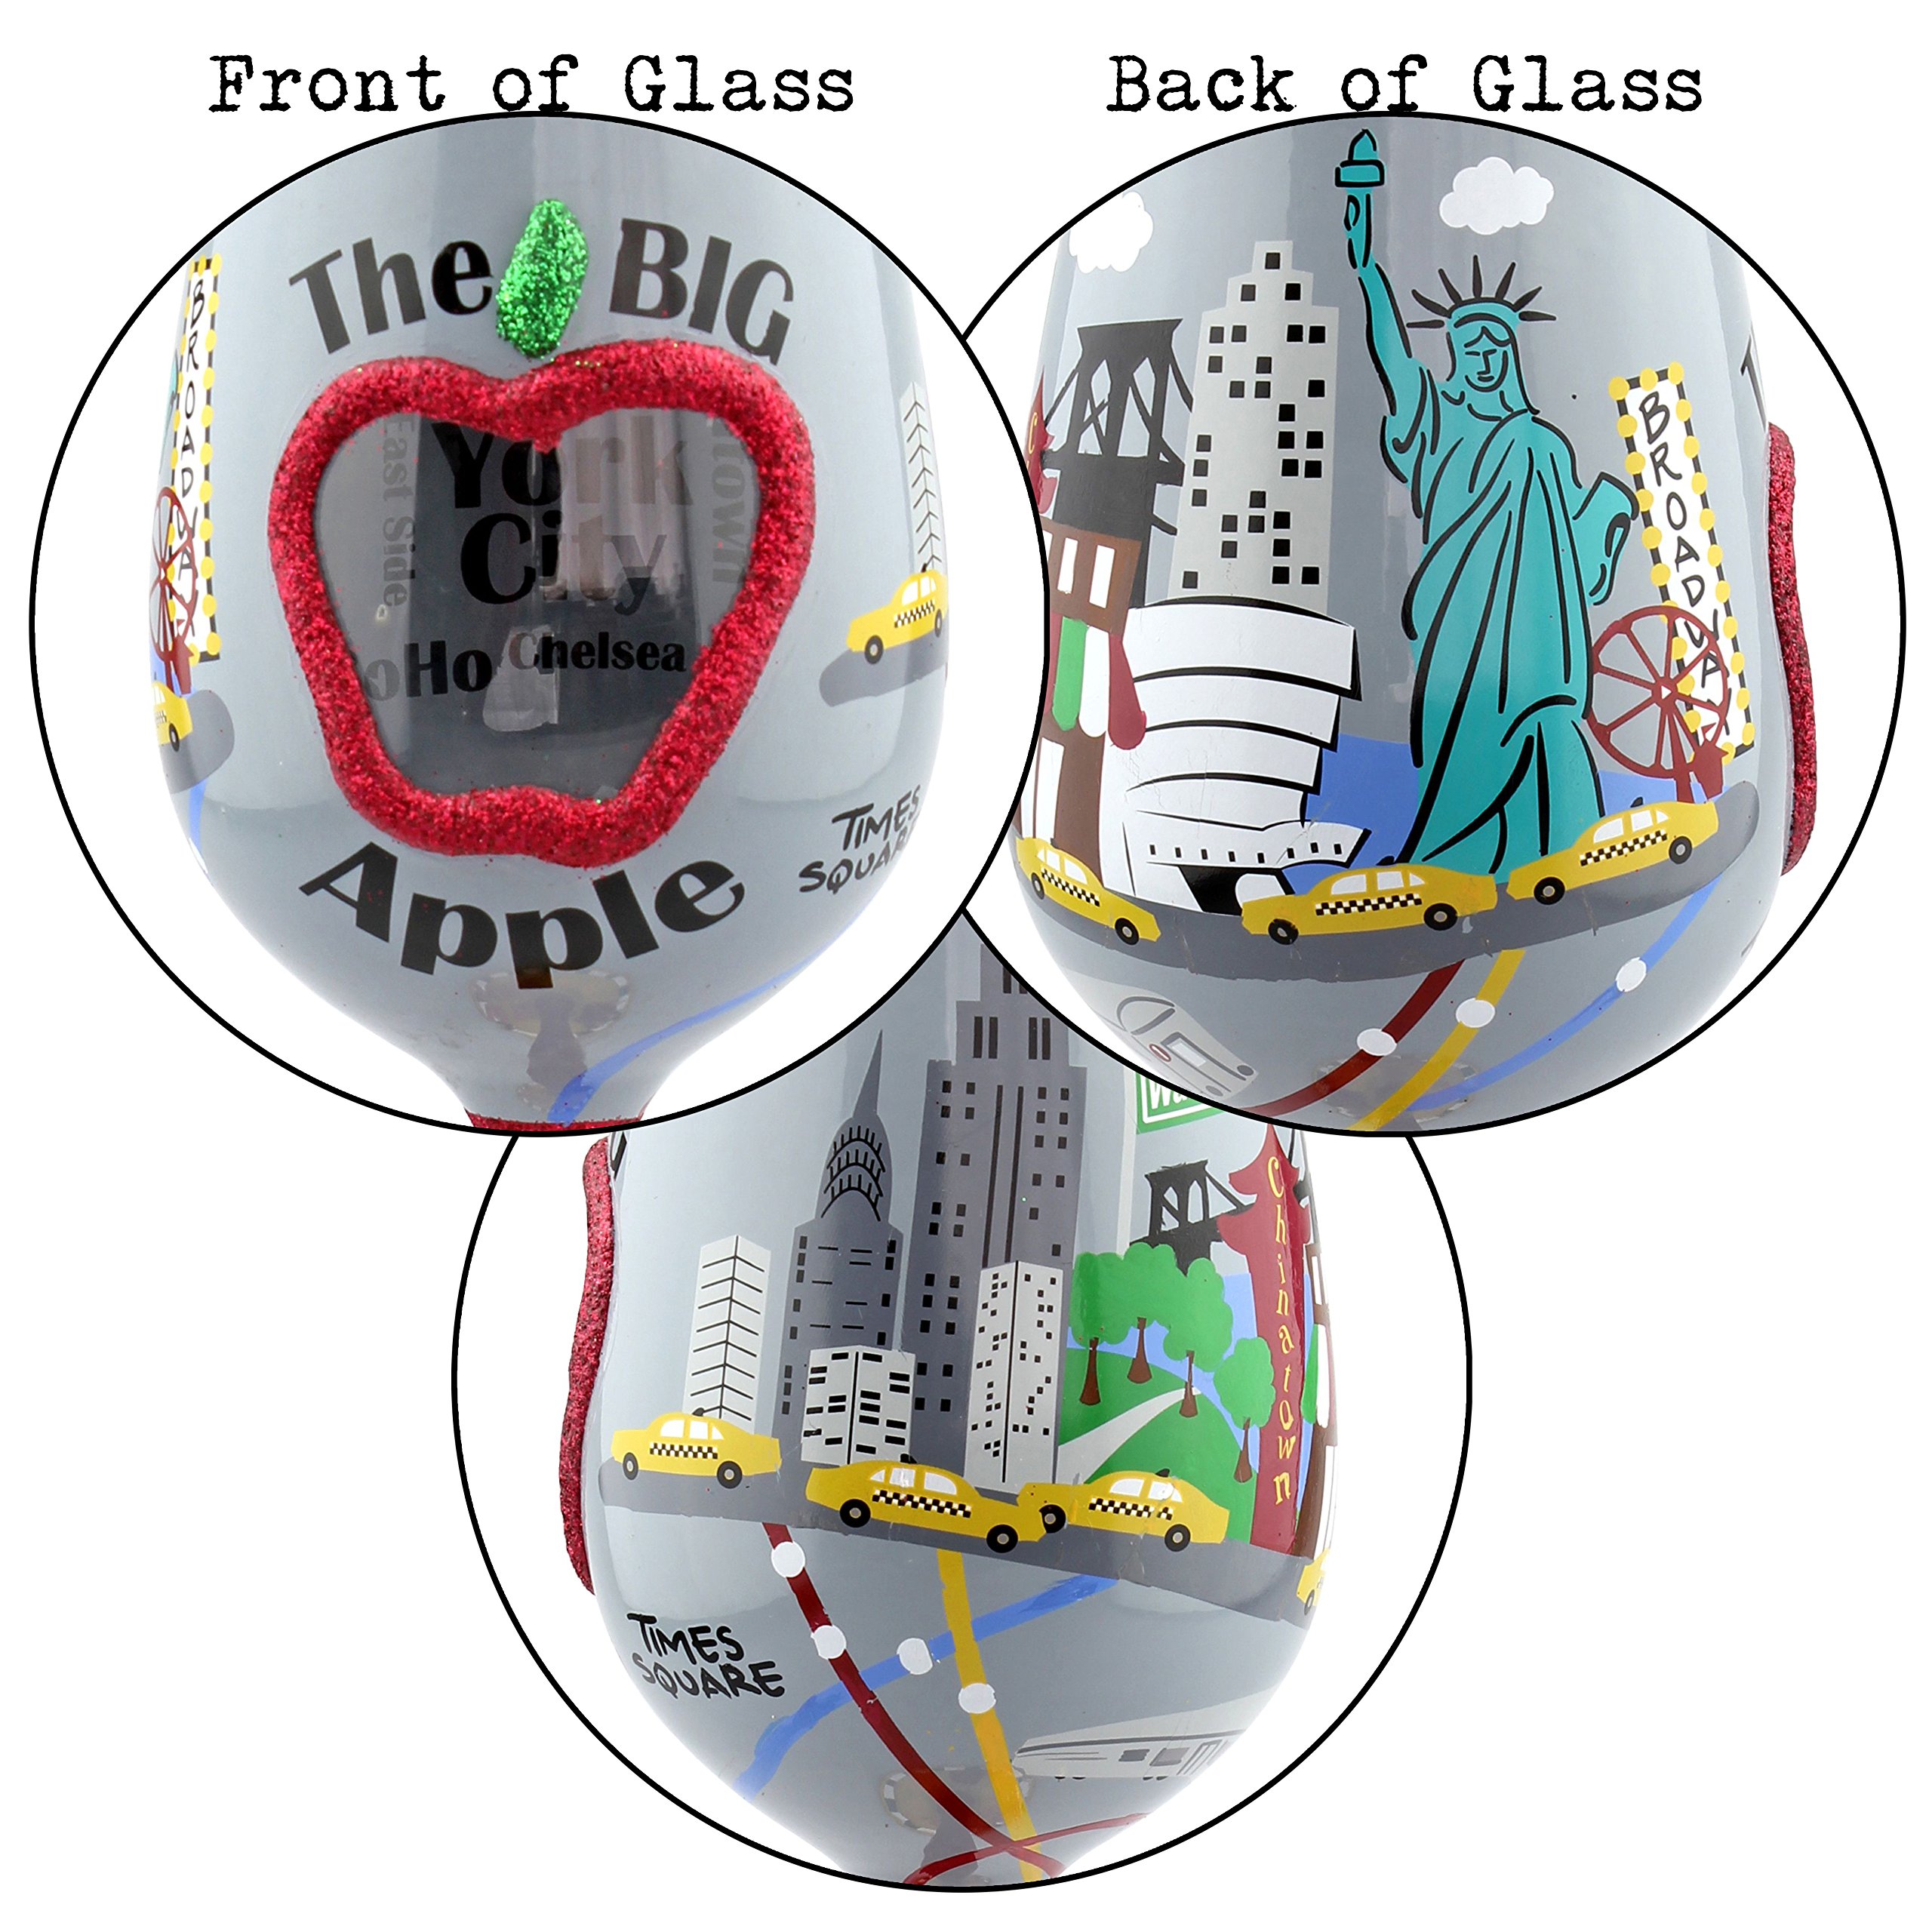 Top Shelf "The Big Apple" New York City Wine Glass ; Decorative Gift Ideas for Friends and Family ; Hand Painted ; For Red or White Wine